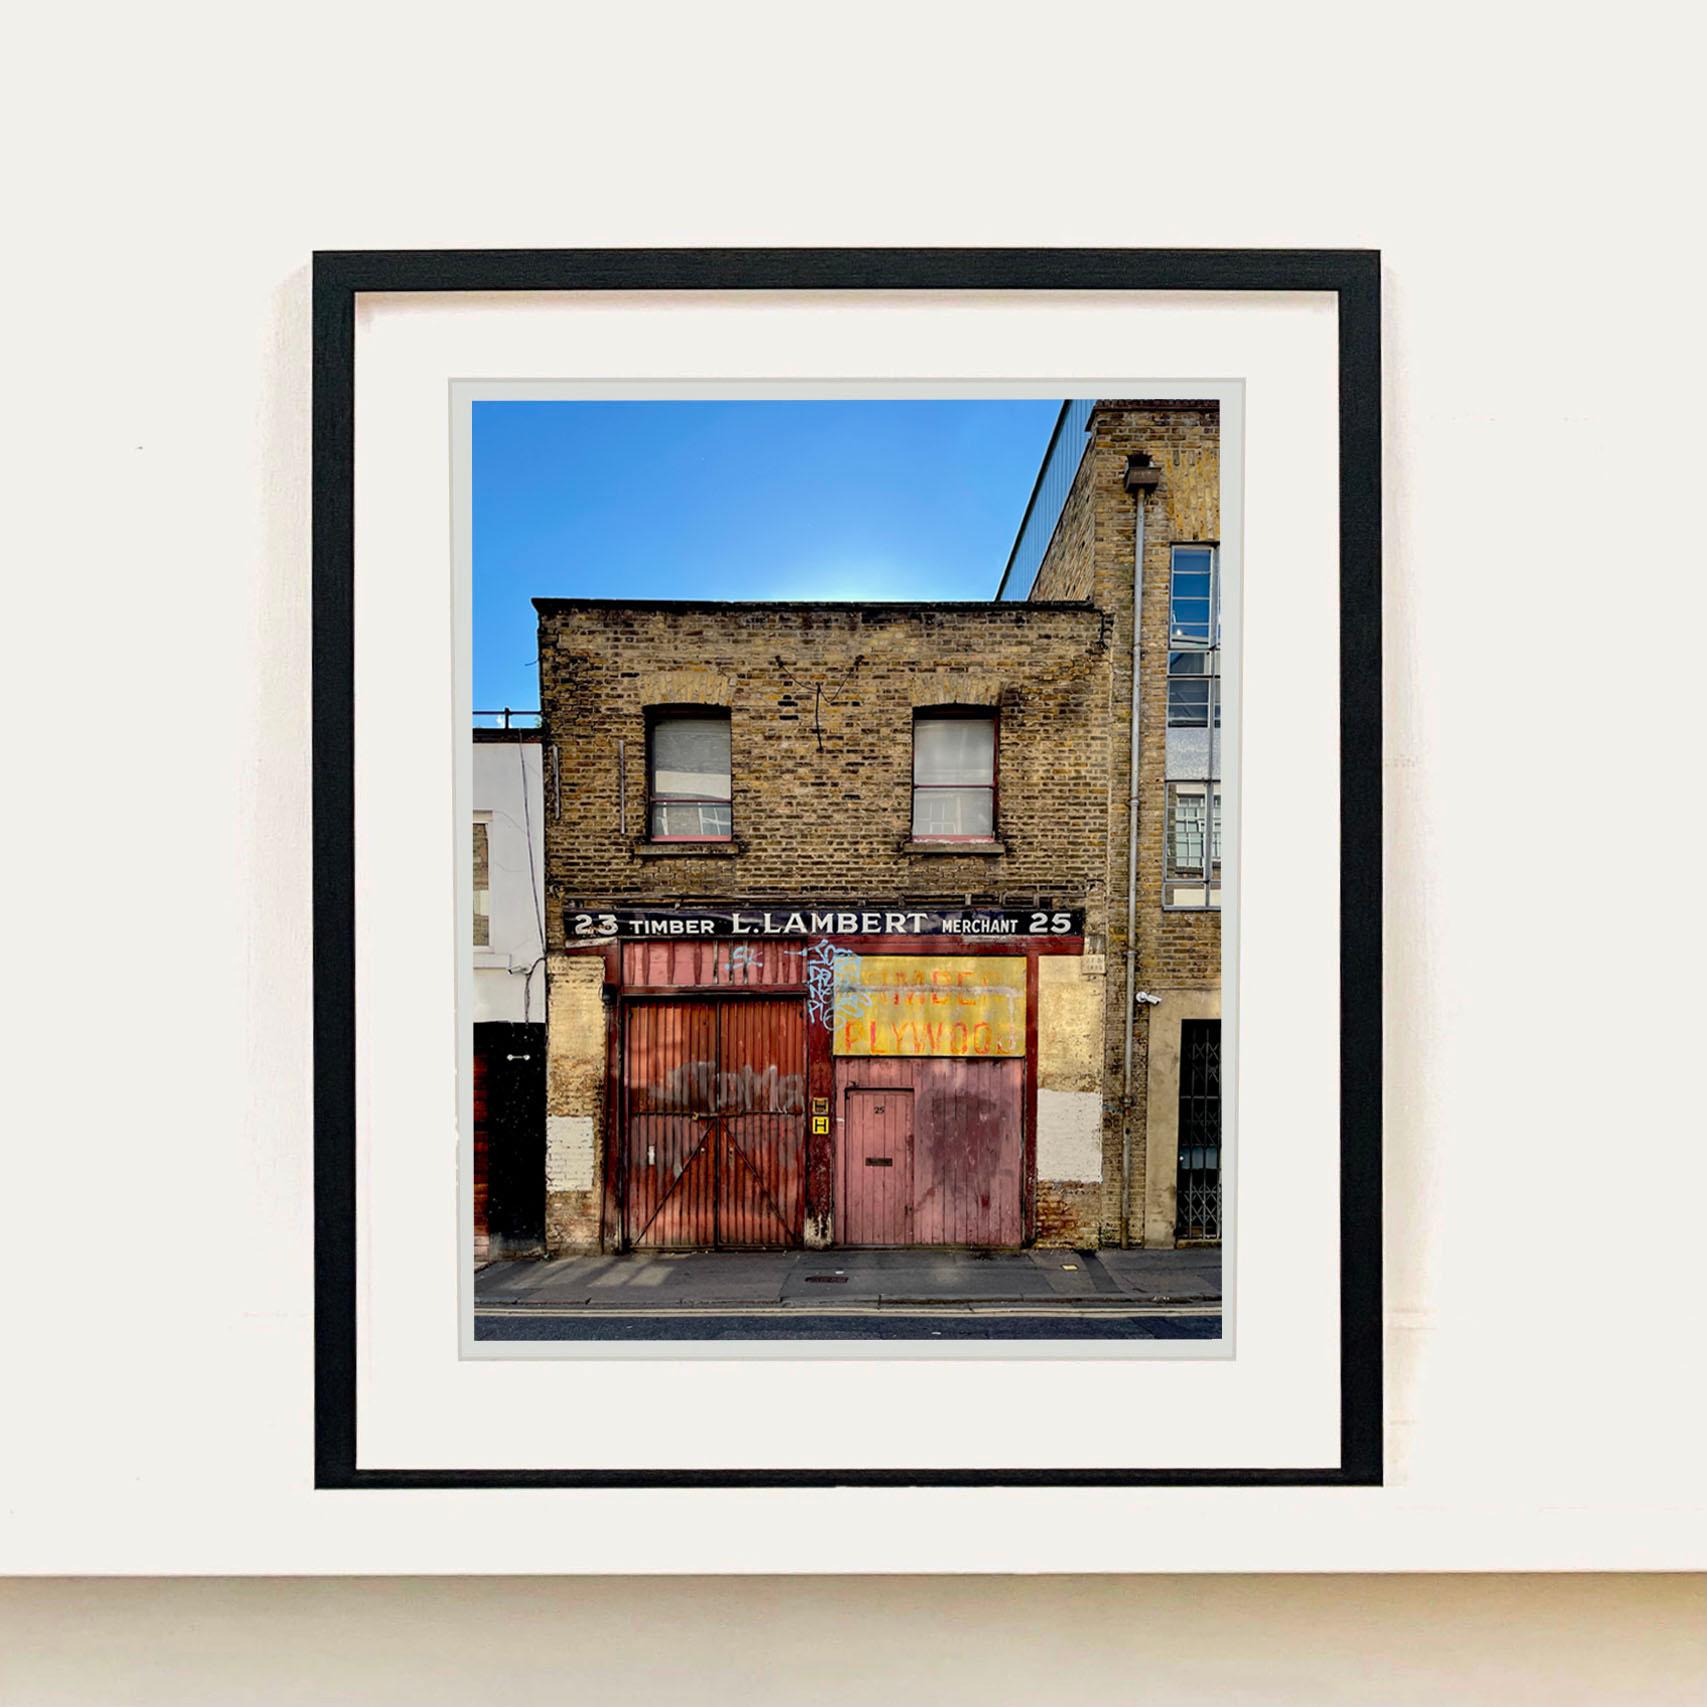 Timber Merchant, London - East London architecture street photography - Print by Richard Heeps